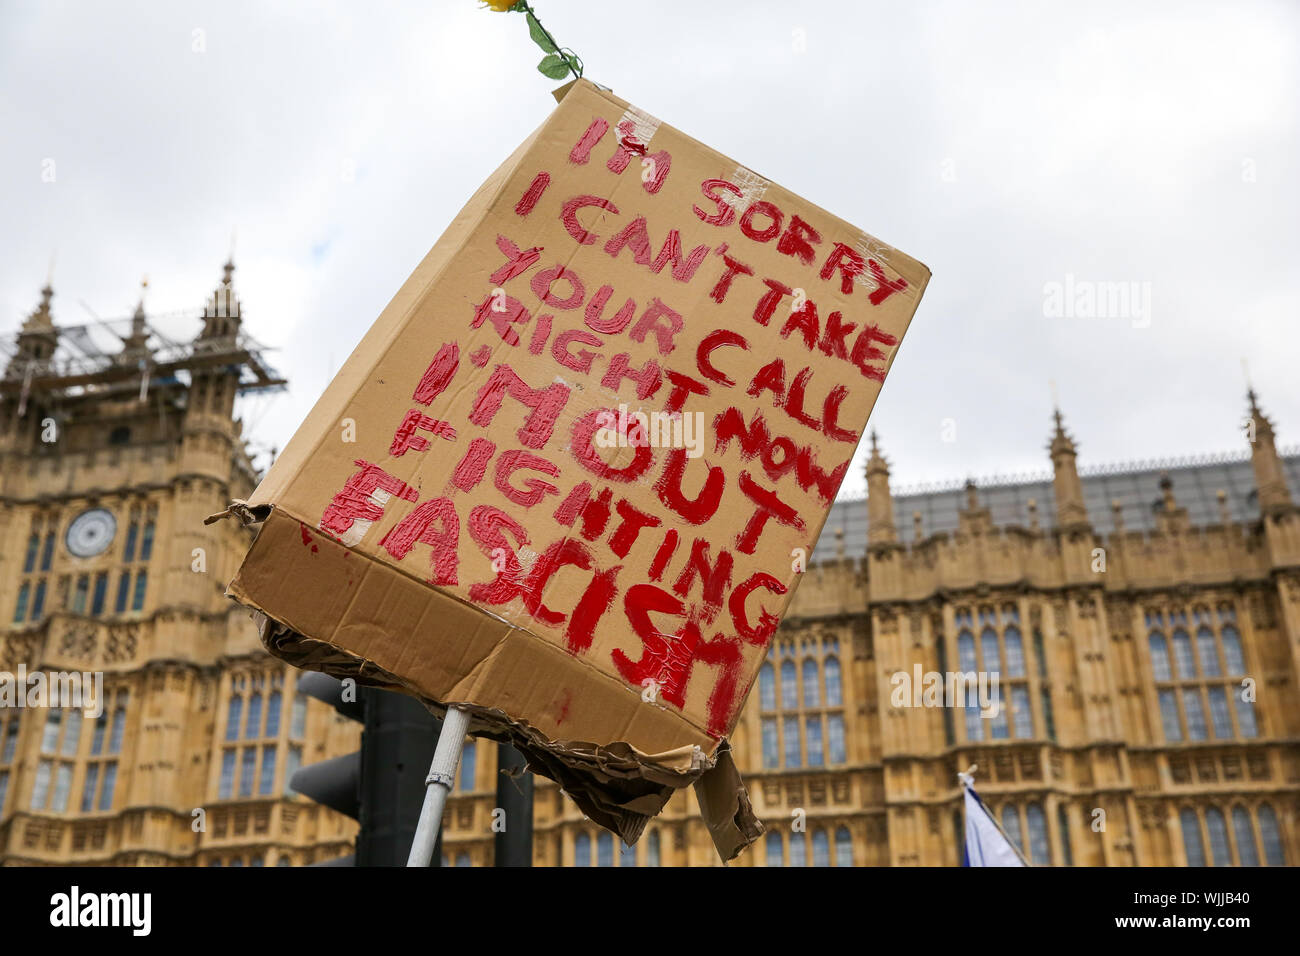 A Pro-Brexit placard during a demonstration in central London on the day MPs return back to Parliament after the summer recess.On Monday 2 Sept 2019 British Prime Minister Boris Johnson warned Conservative MPs not to vote against the government in the next night's Bill that would block a no deal Brexit. Several MPs vowed to vote with the opposition regardless of the personal consequences. Stock Photo